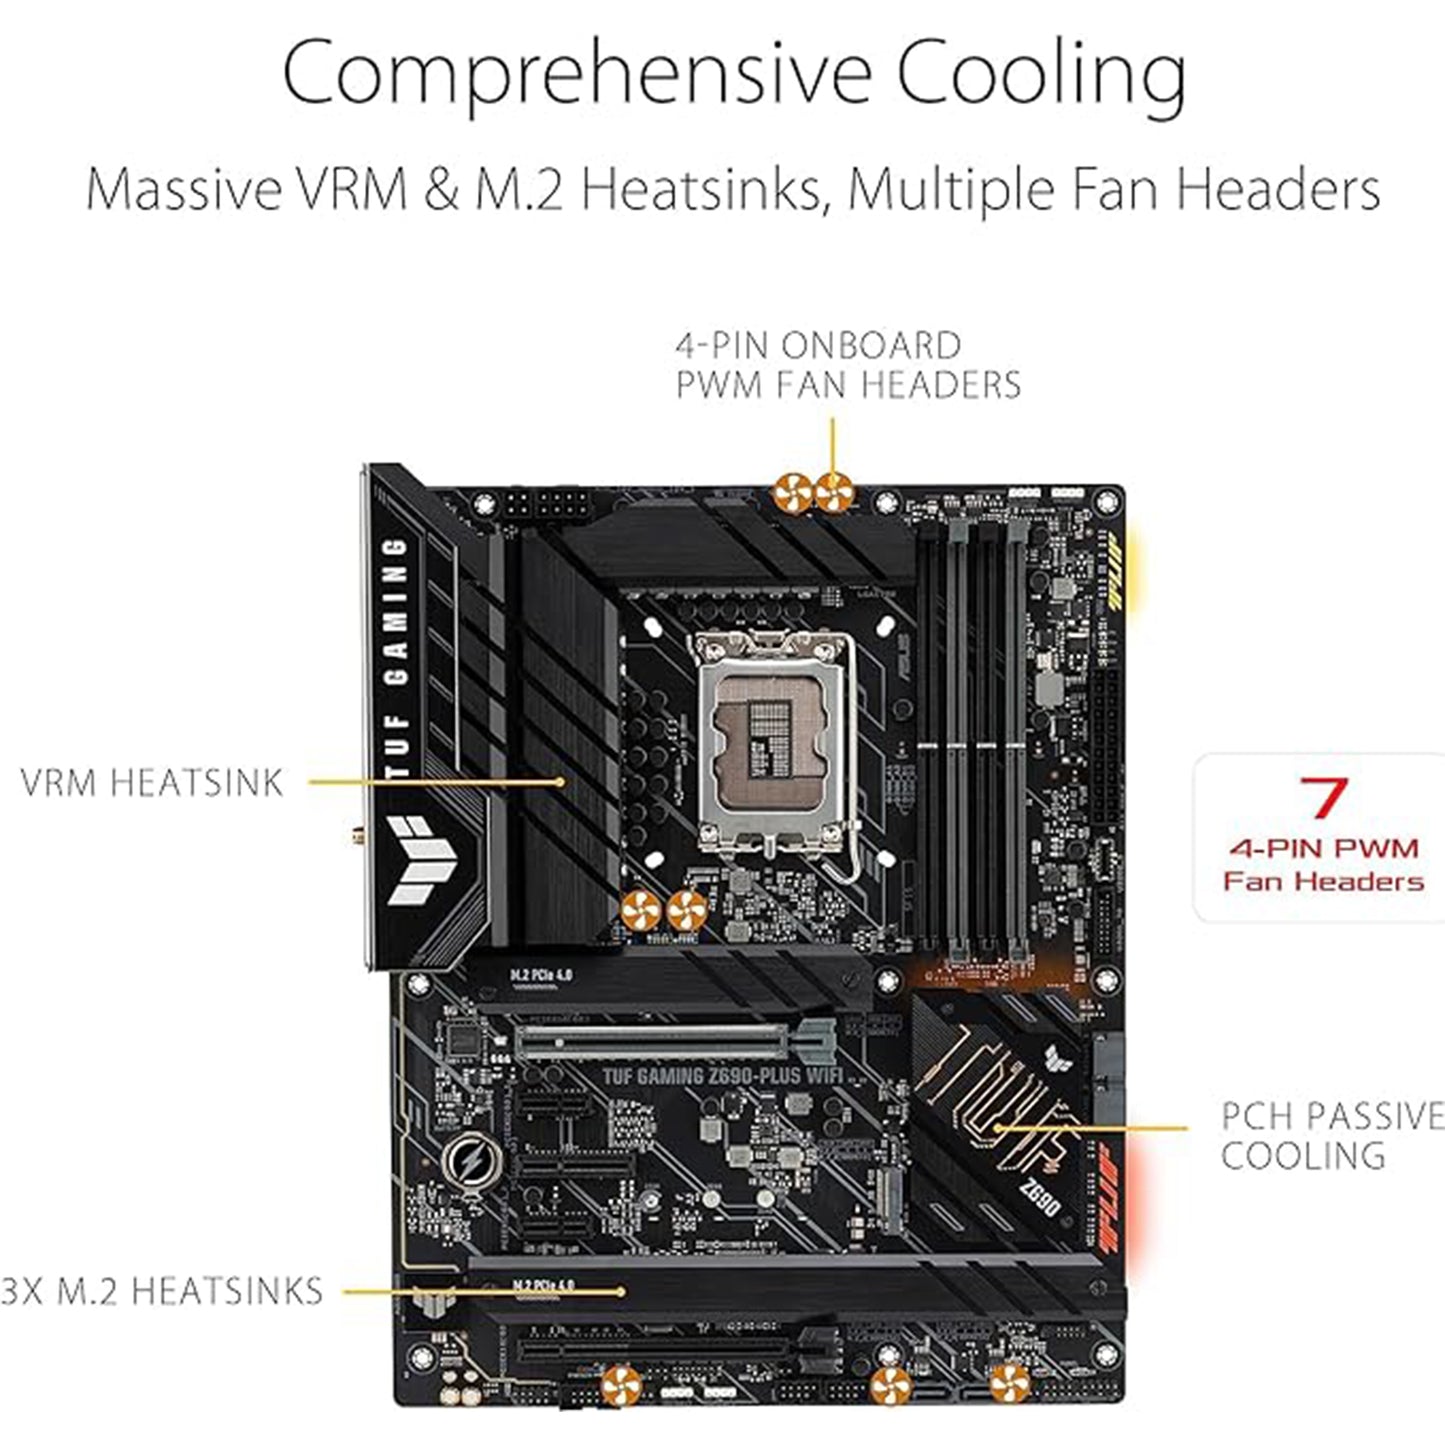 Micro Center Intel Core i9-12900K 16 Cores up to 5.2 GHz Unlocked Desktop Processor with Integrated Intel UHD Graphics 770 Bundle with ASUS TUF Gaming Z690-PLUS WiFi LGA1700 DDR5 ATX Motherboard